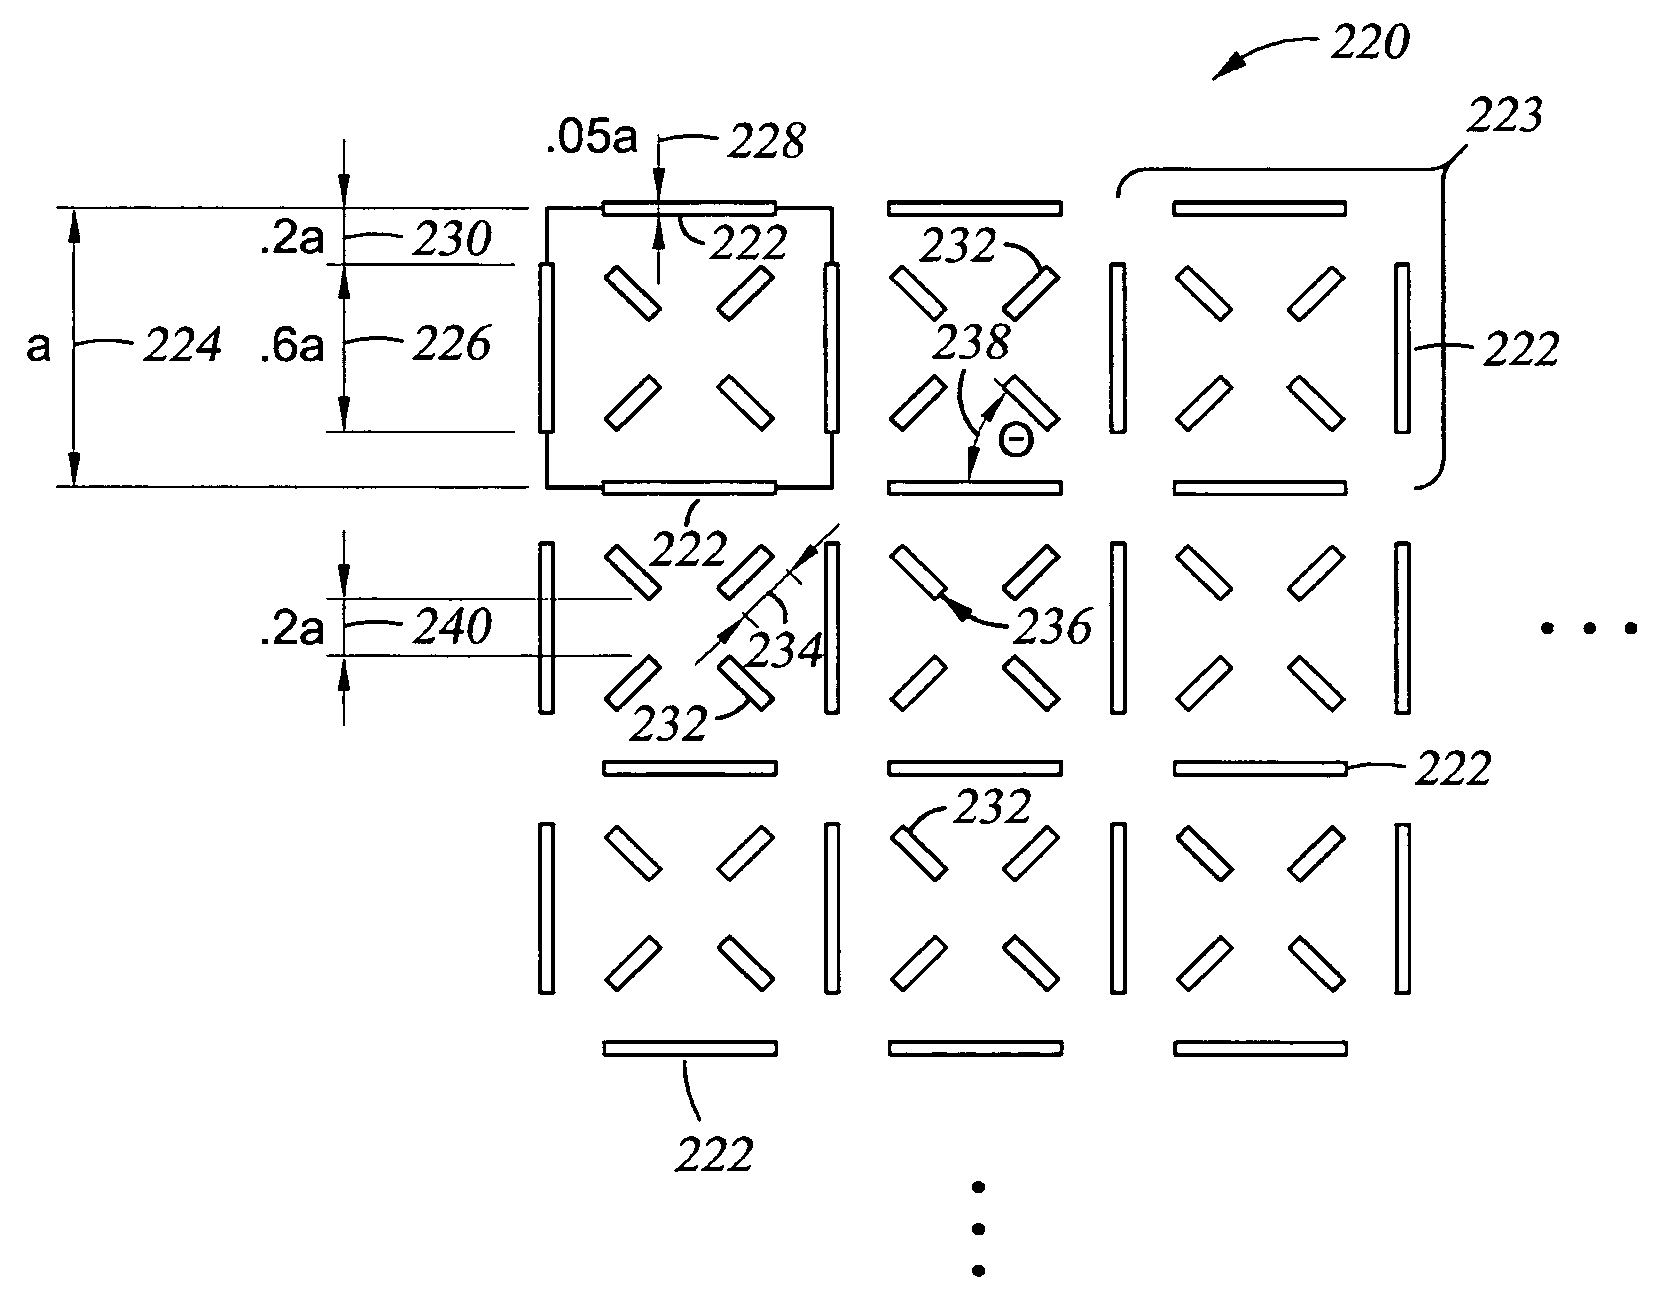 Method and apparatus which enable high resolution particle beam profile measurement